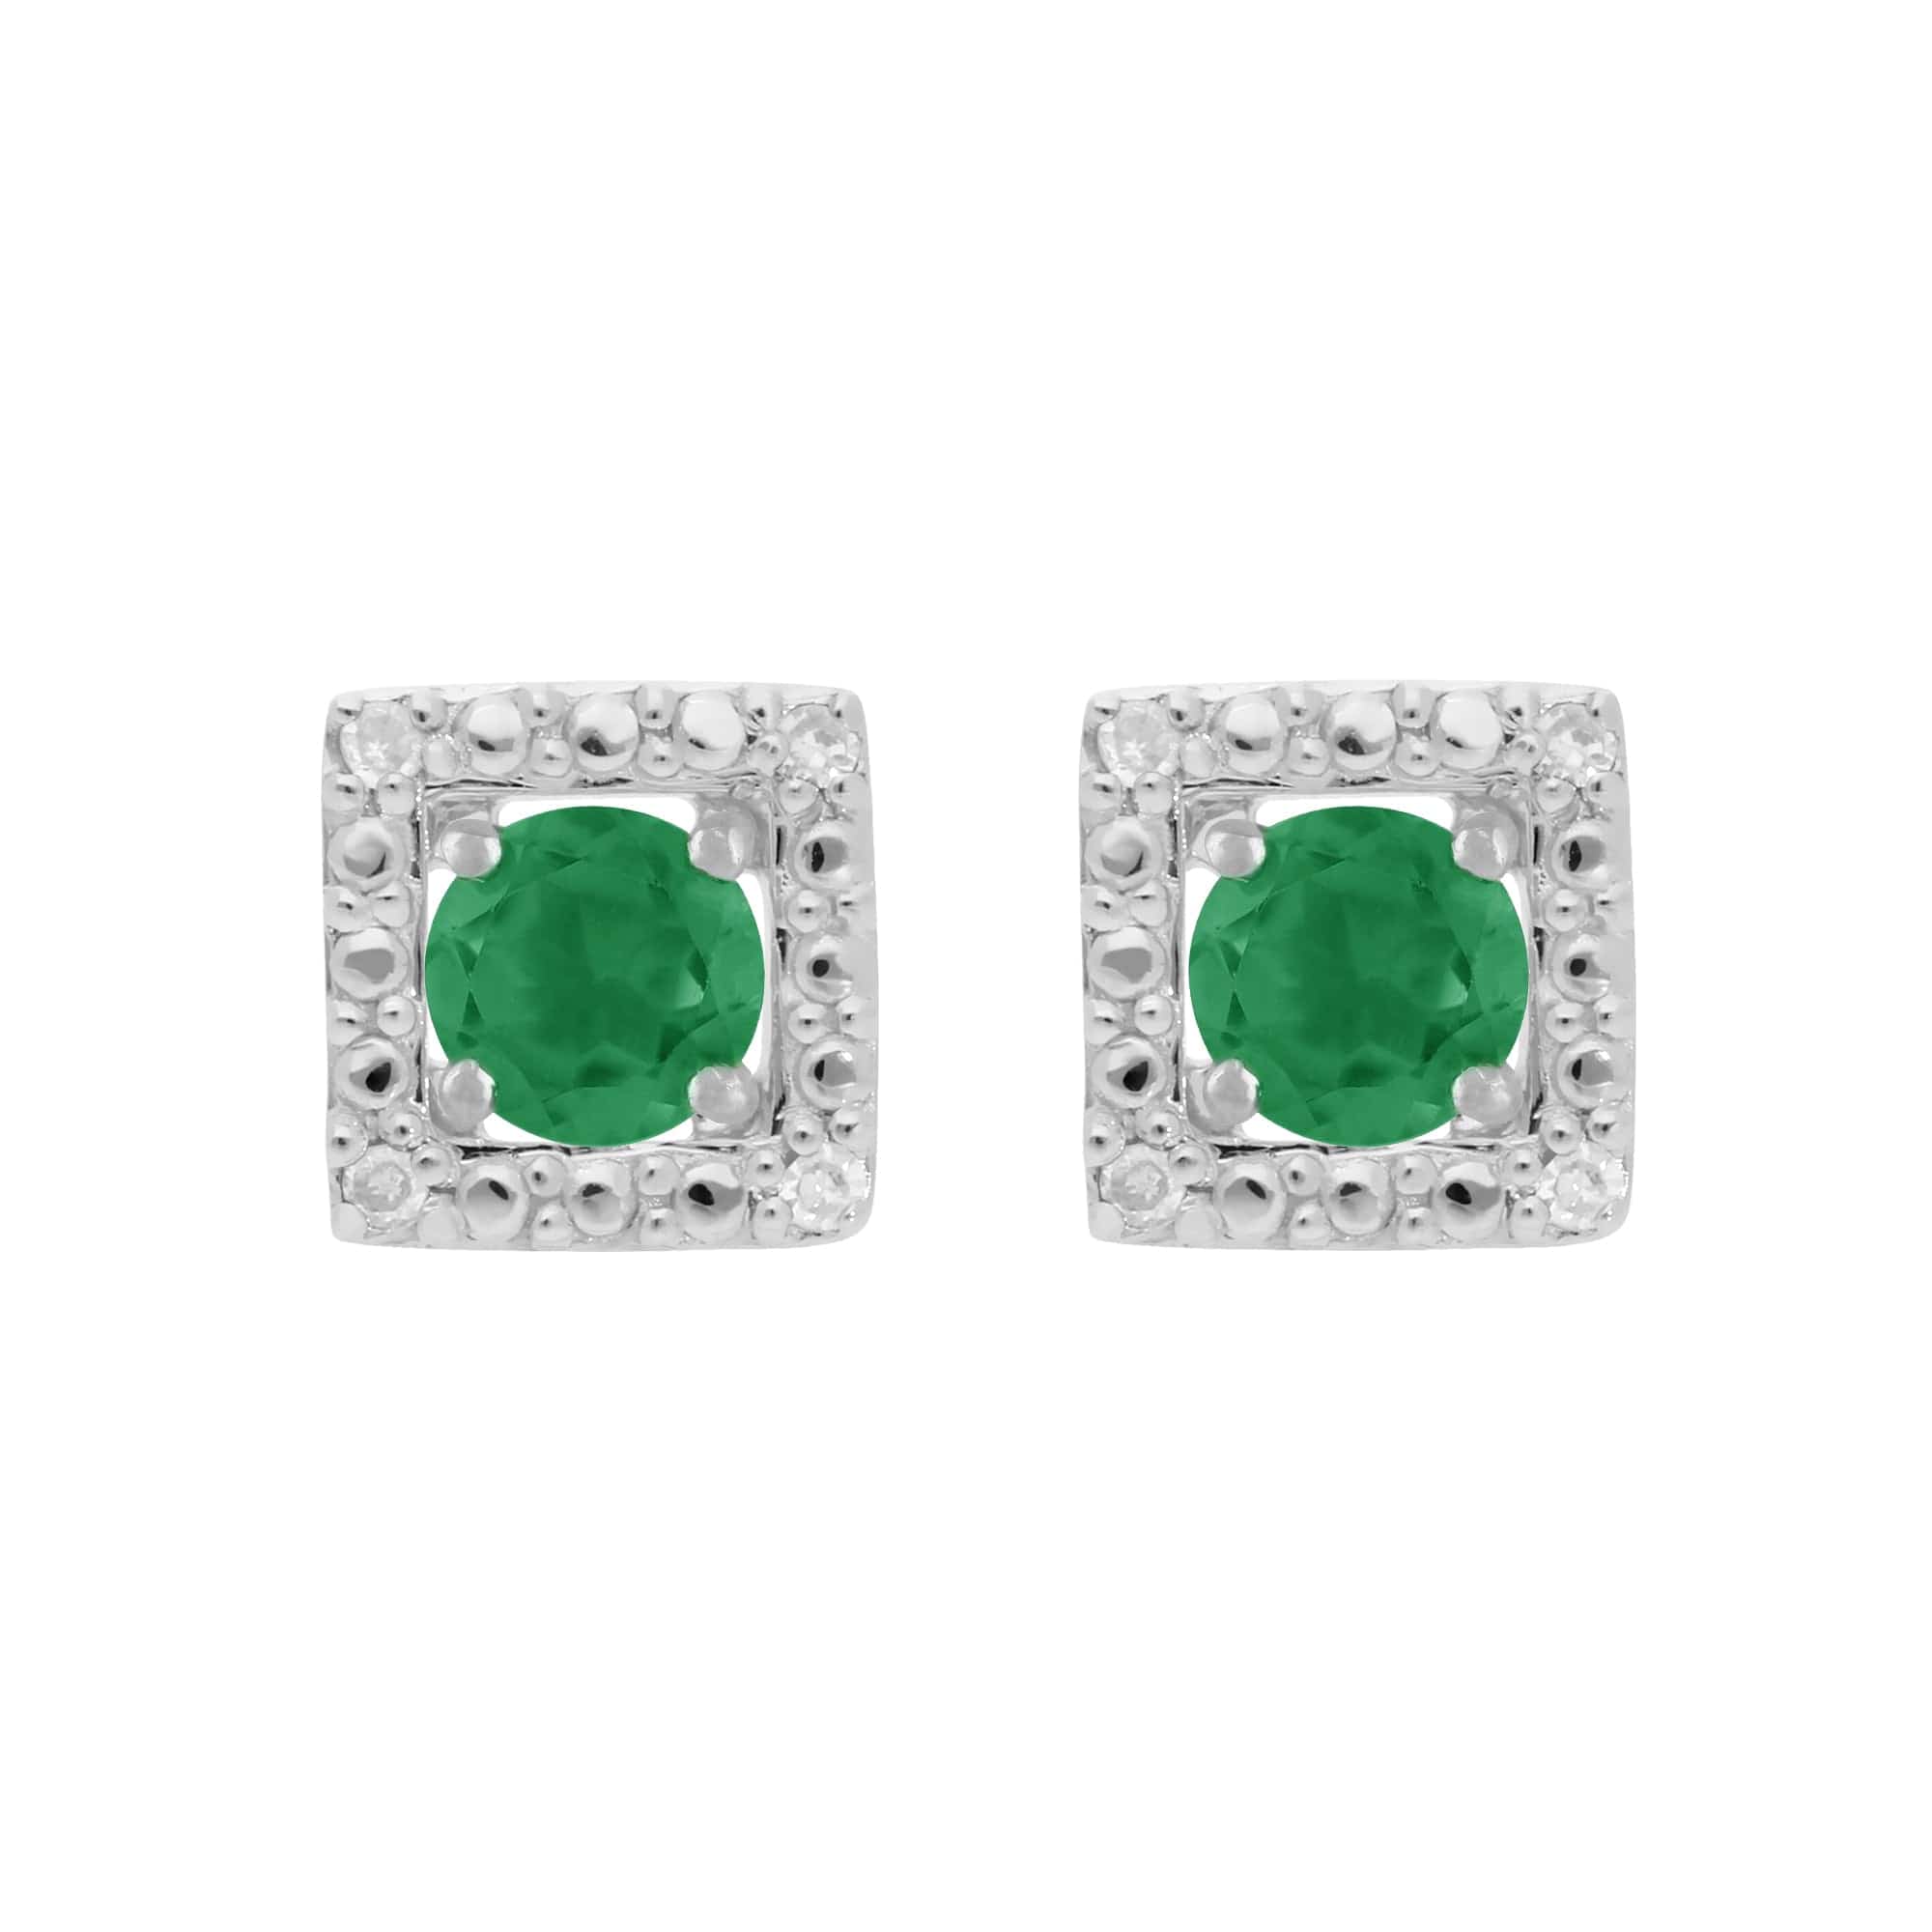 11621-162E0245019 Classic Round Emerald Stud Earrings with Detachable Diamond Square Ear Jacket in 9ct White Gold 1